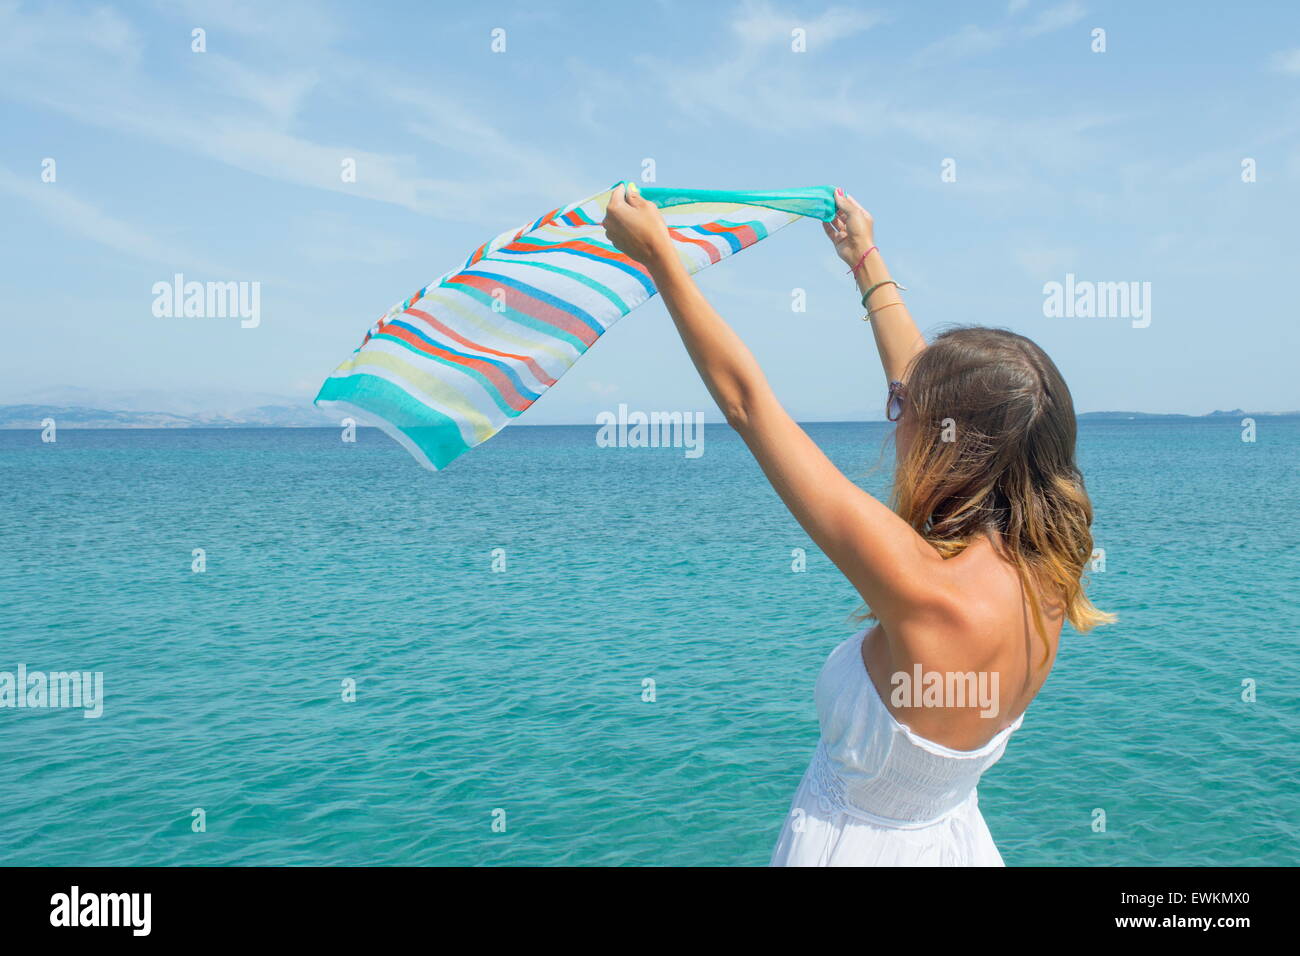 Girl in white dress waving a colorful scarf on seaside Stock Photo